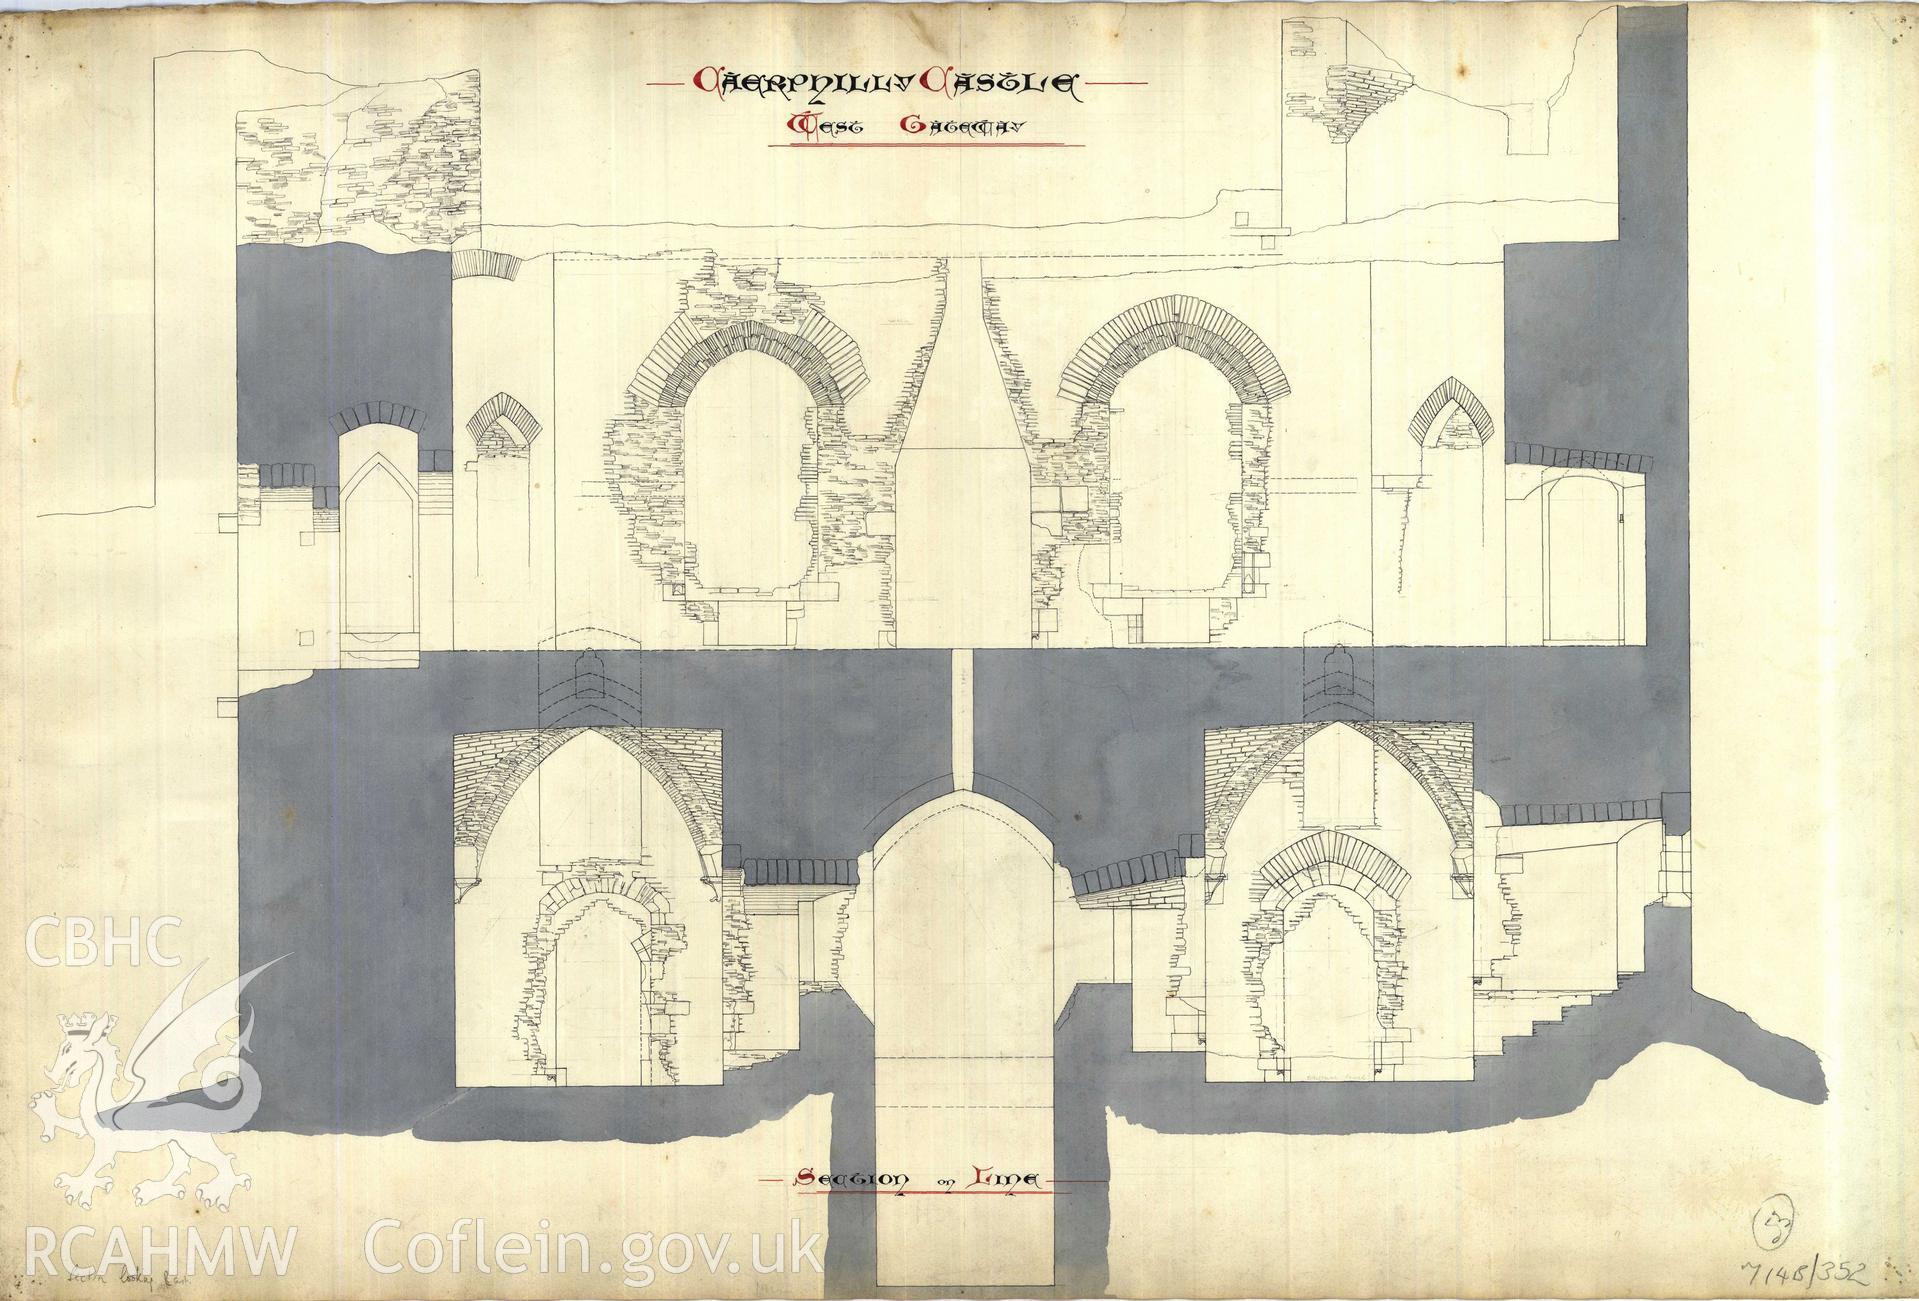 Cadw guardianship monument drawing of Caerphilly Castle. Inner W gate, section/elev to E. Cadw Ref. No:714B/352. Scale 1:24.